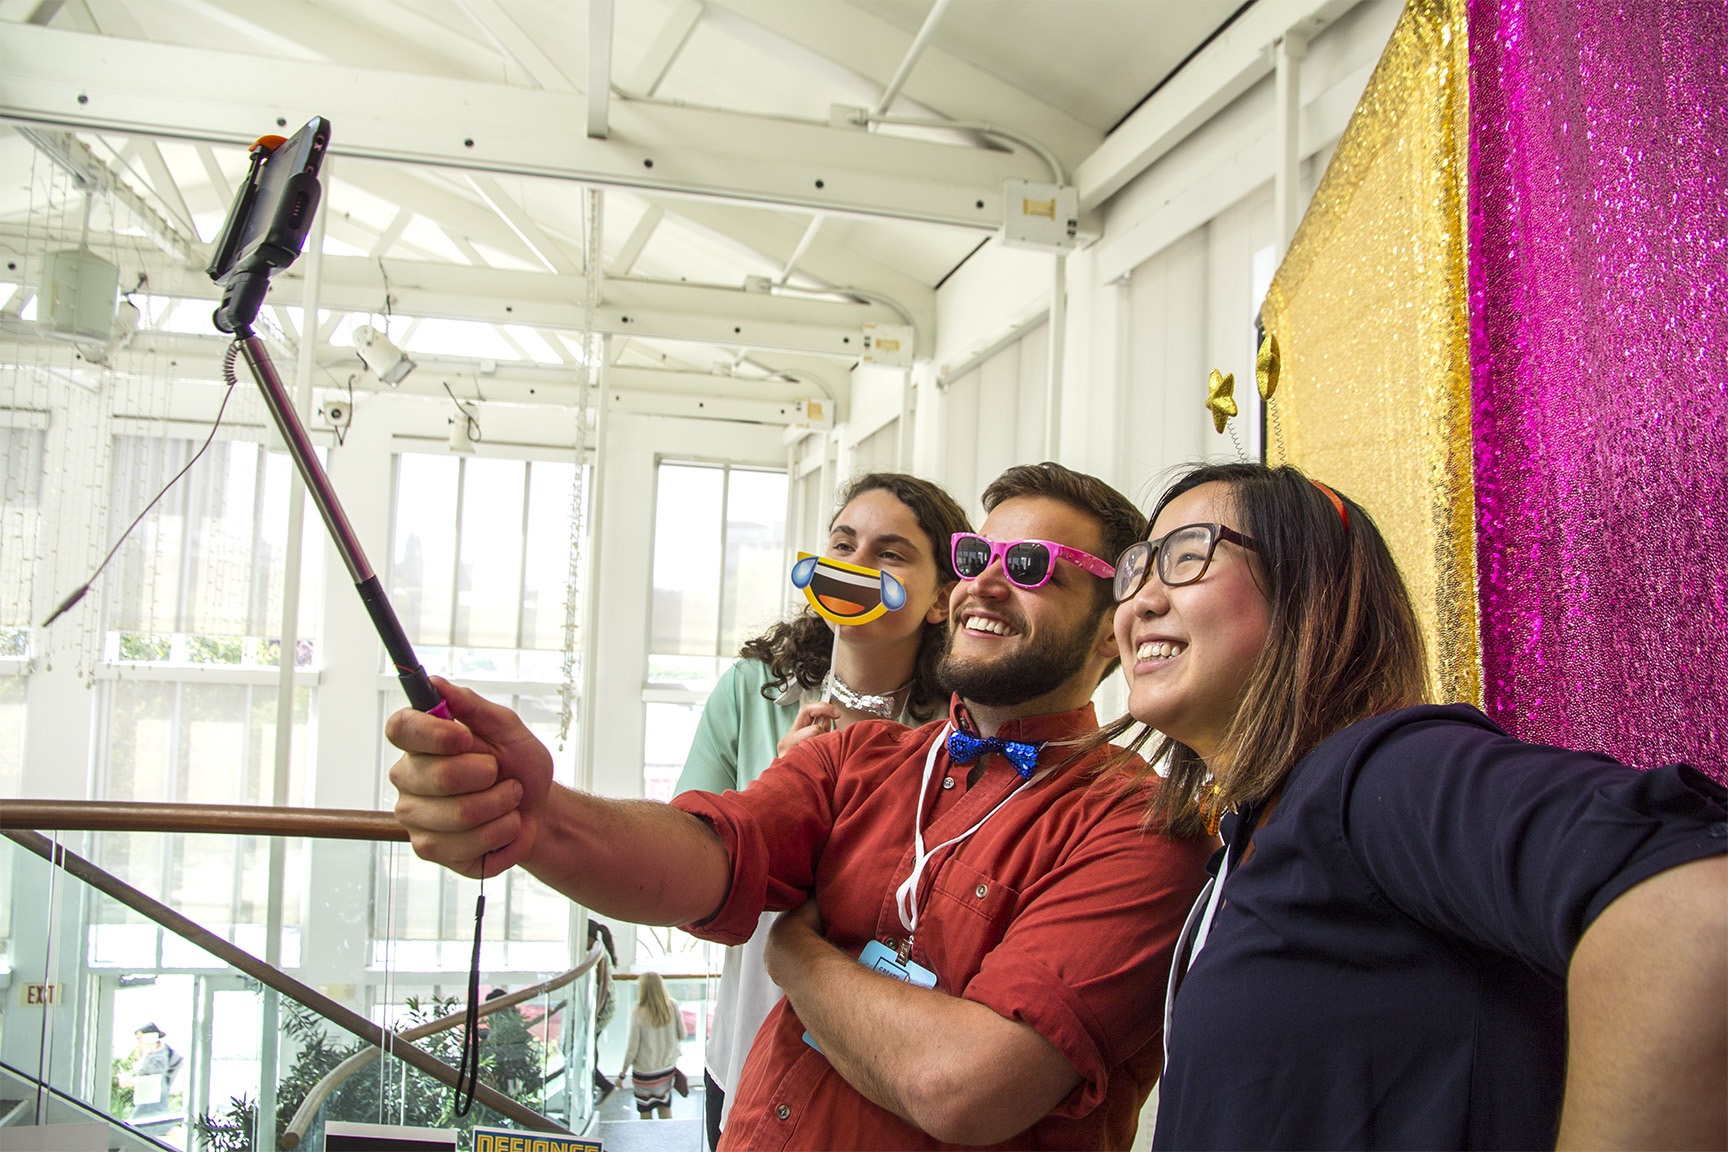 Picture of 3 people taking a selfie using fun props in front of a sparkly background